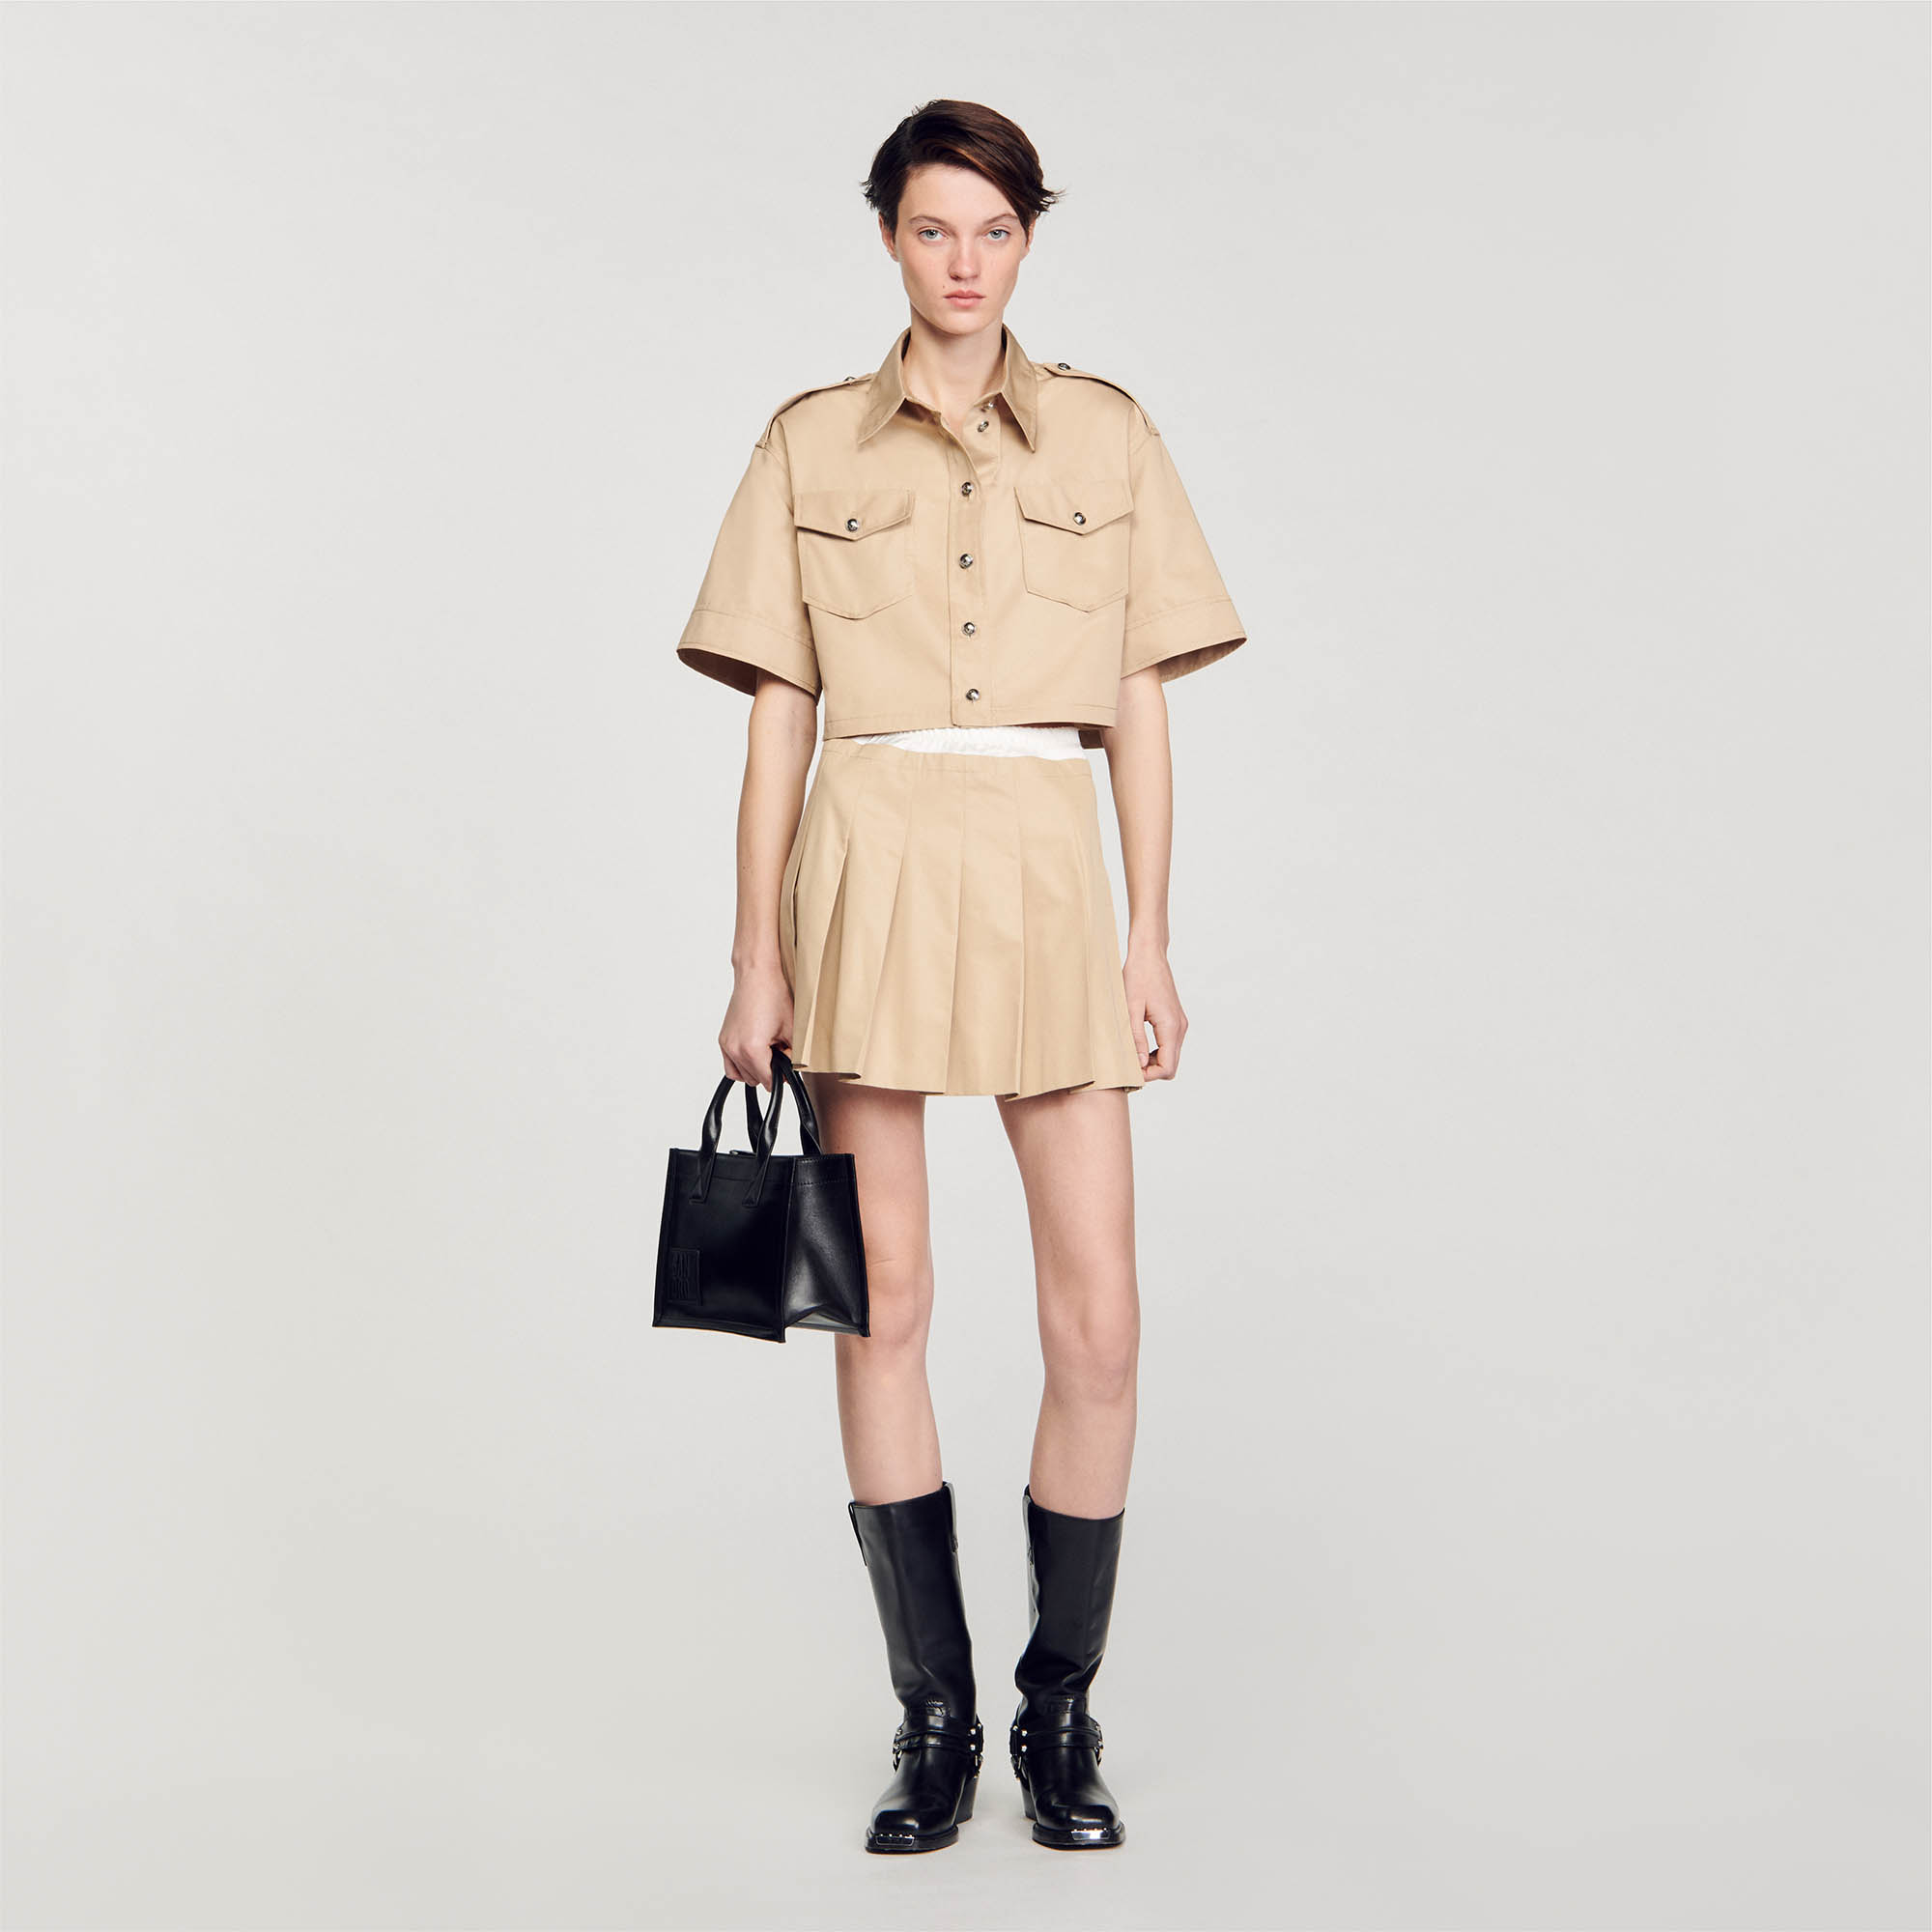 Sandro Officer's cropped shirt